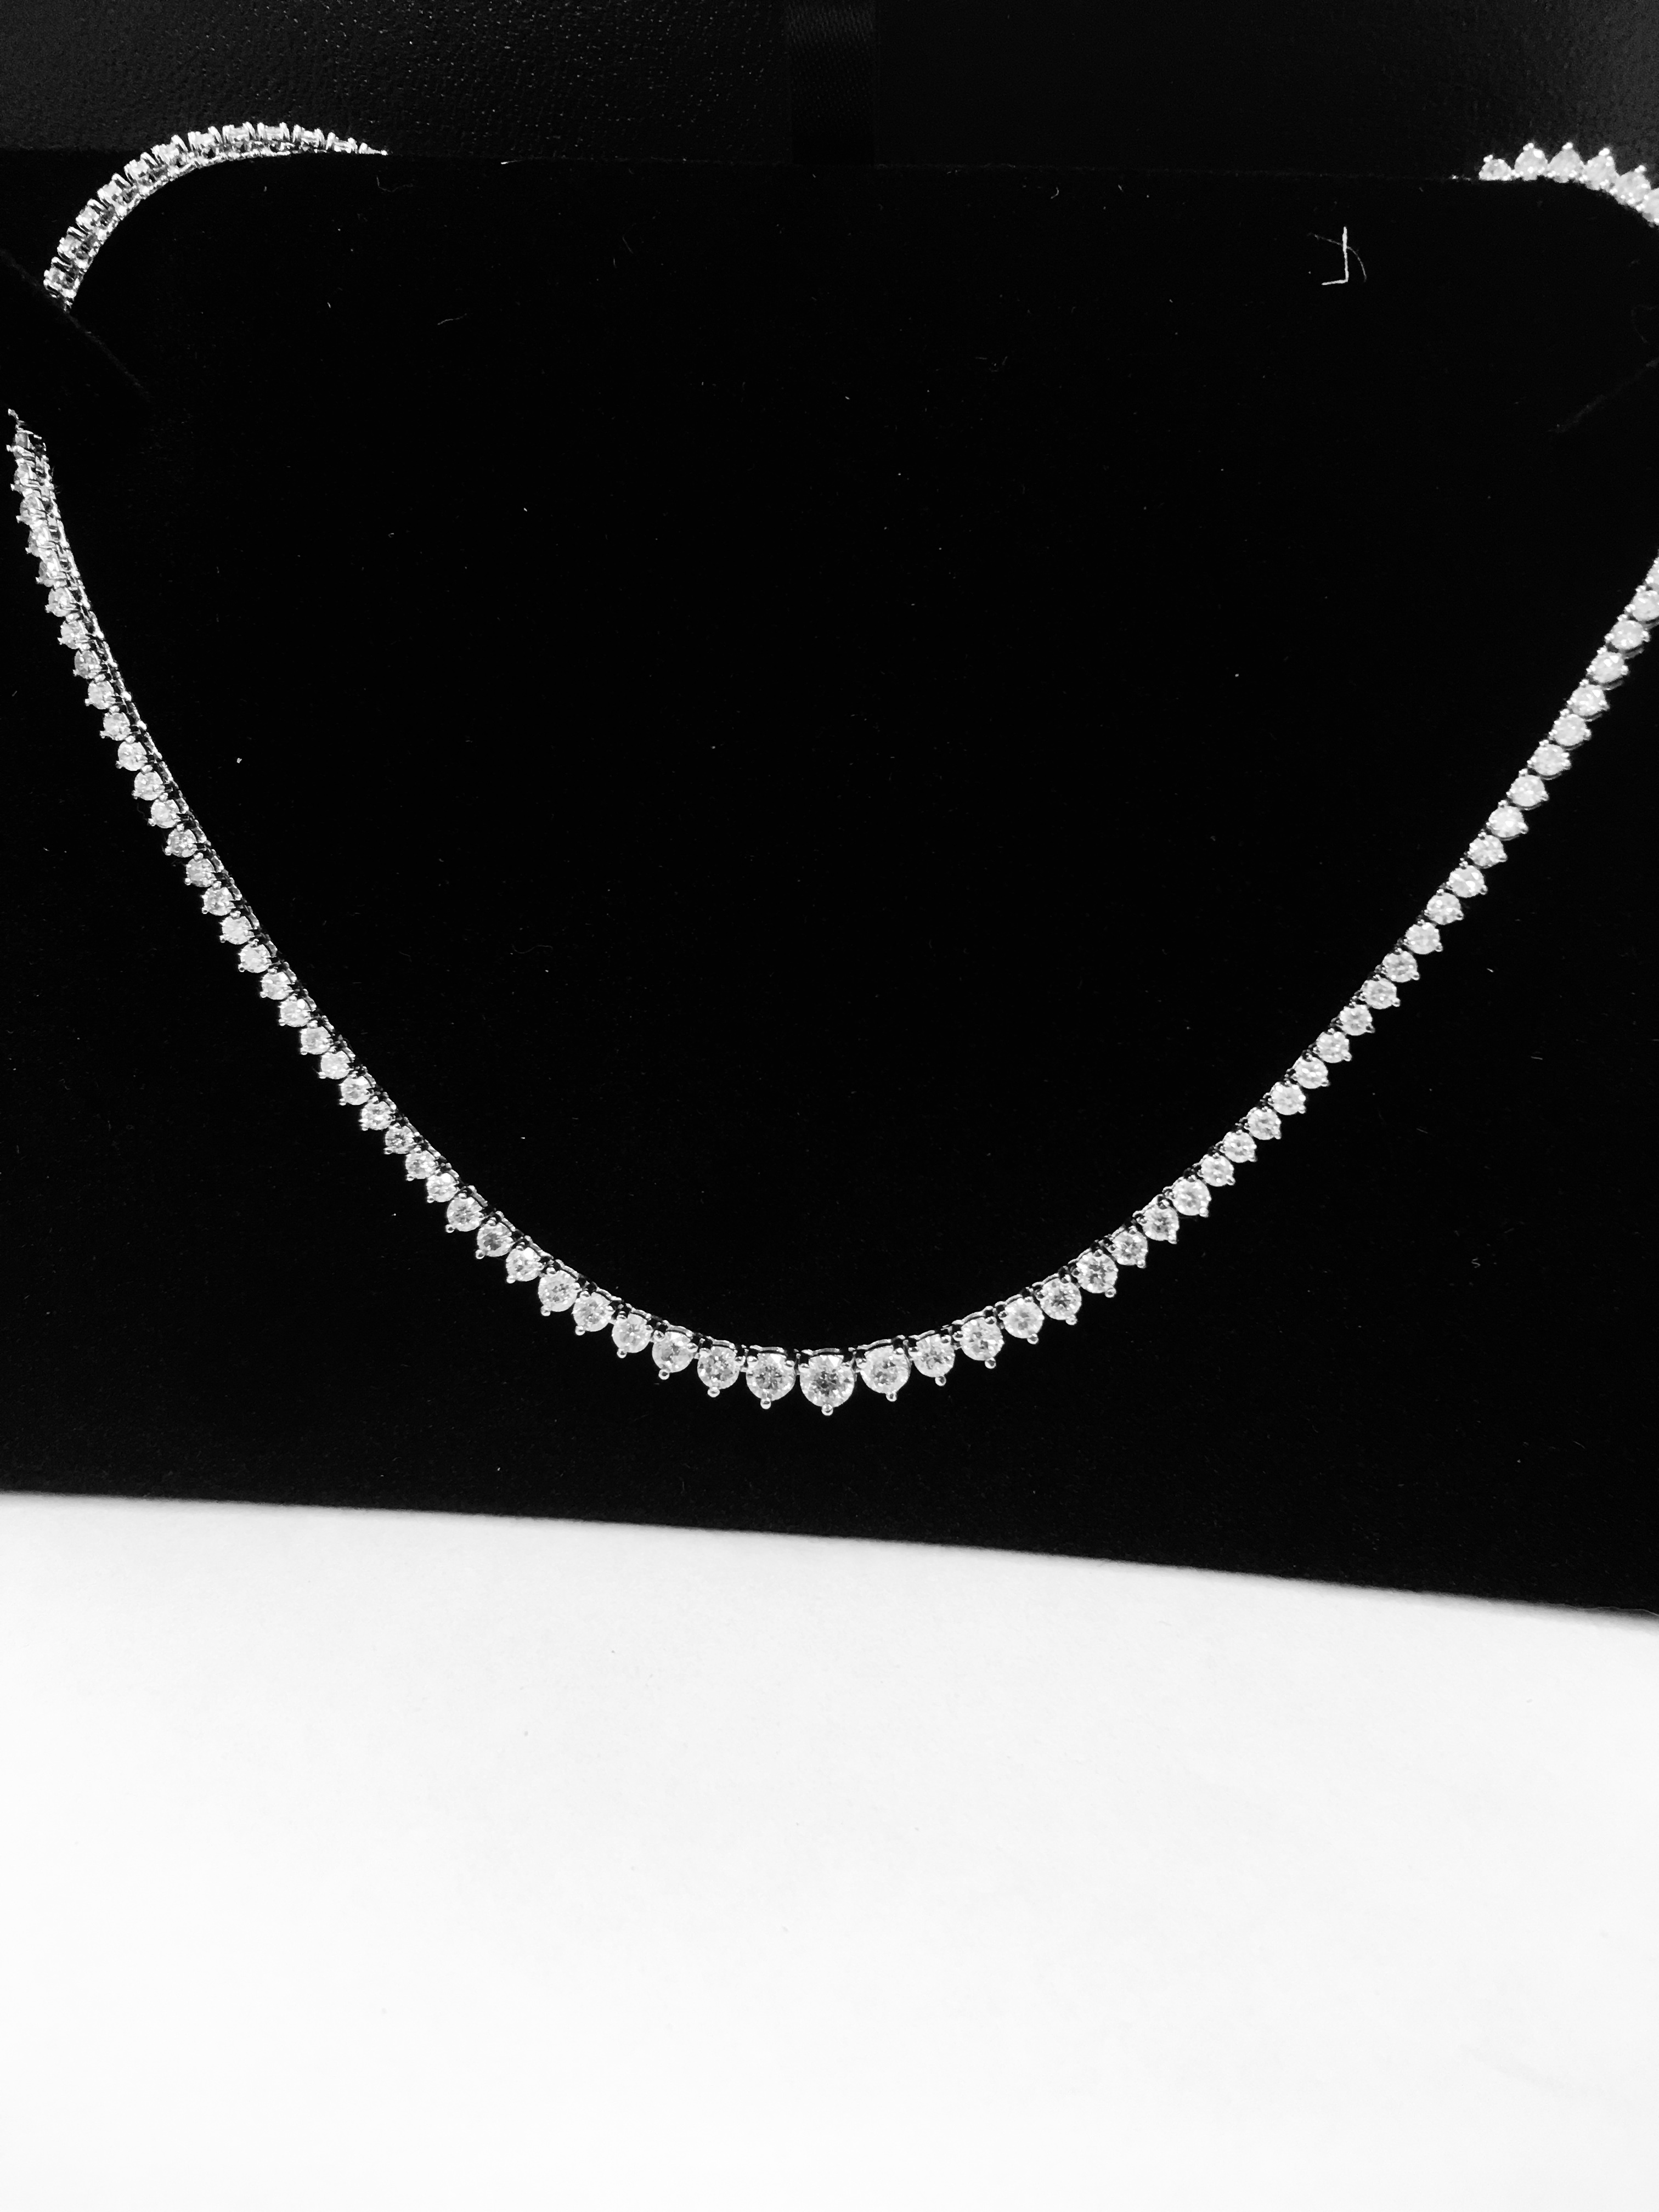 6.50ct Diamond tennis style necklace. 3 claw setting. Graduated diamonds, I colour, Si2 clarity - Image 3 of 6